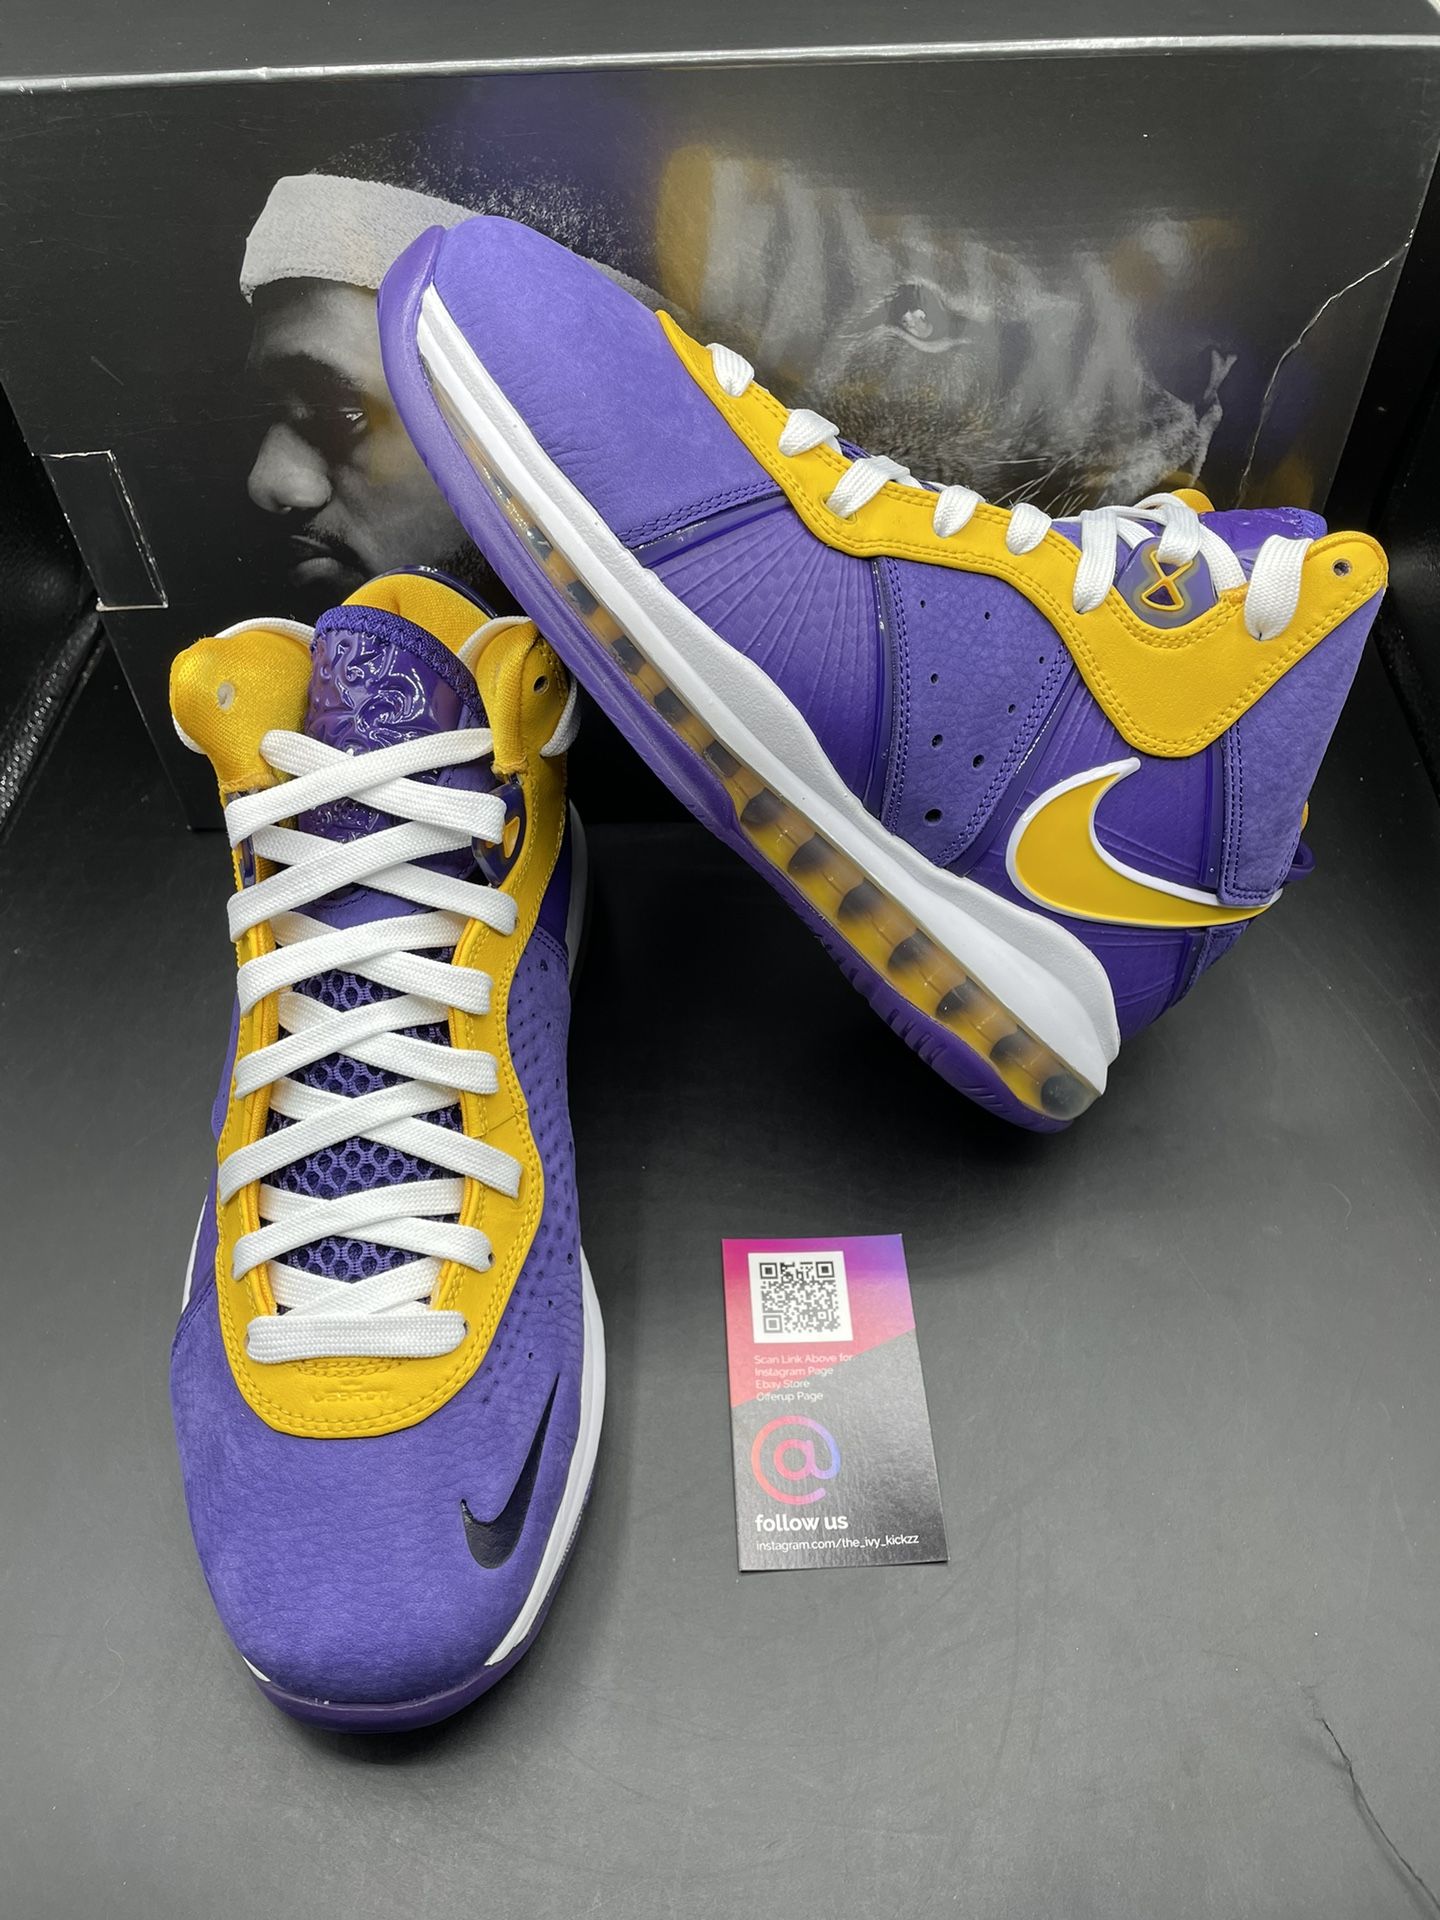 New Nike Lebron 8 QS LA Lakers Court Purple University Gold Mens Size 8  Basketball Shoes for Sale in Compton, CA - OfferUp